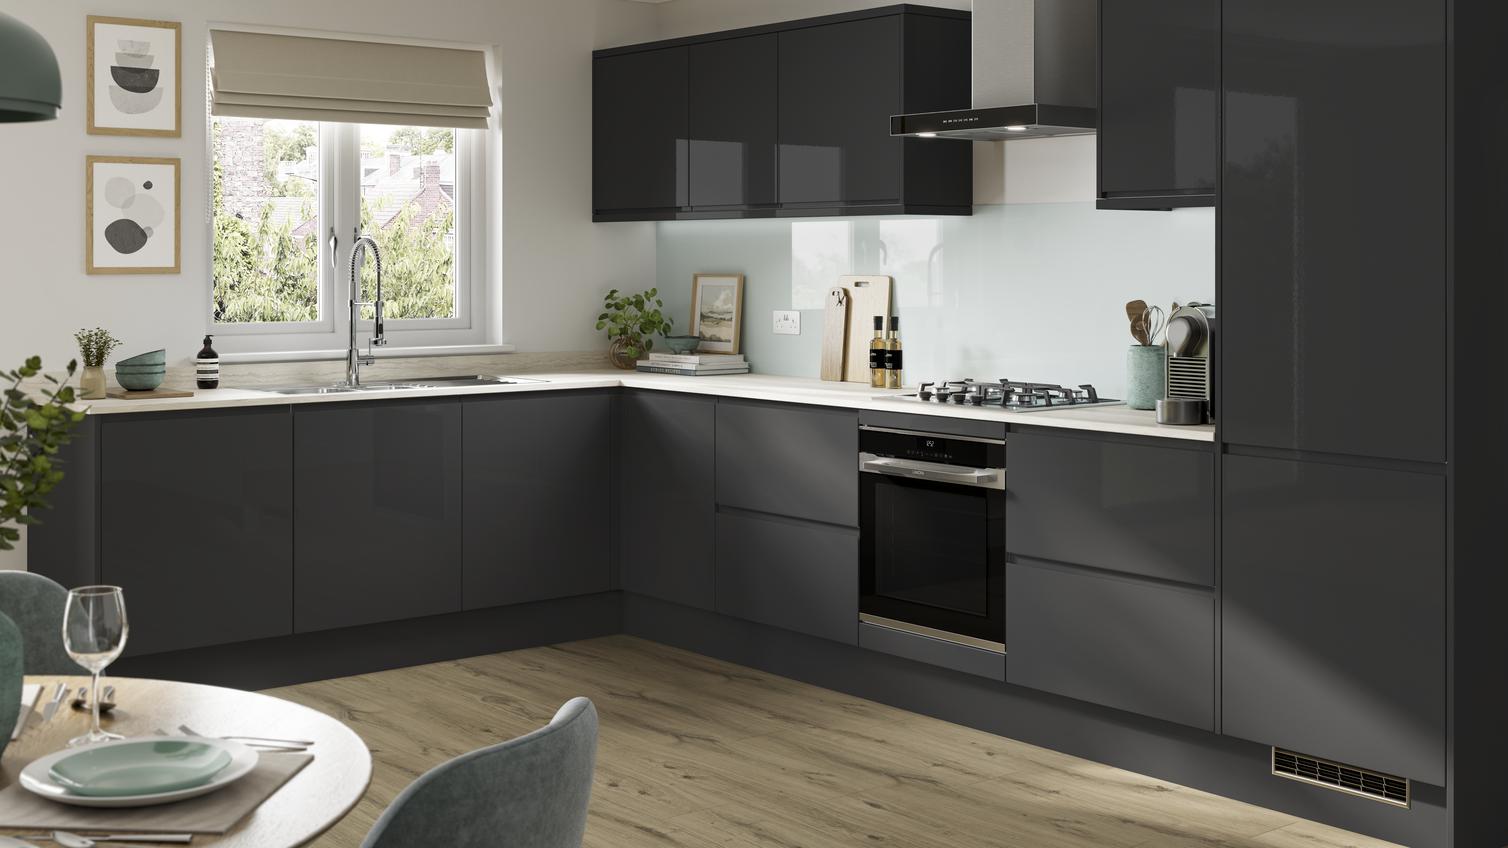 A statement charcoal kitchen design with integrated handle doors, a white worktop, and black and chrome cooking devices.